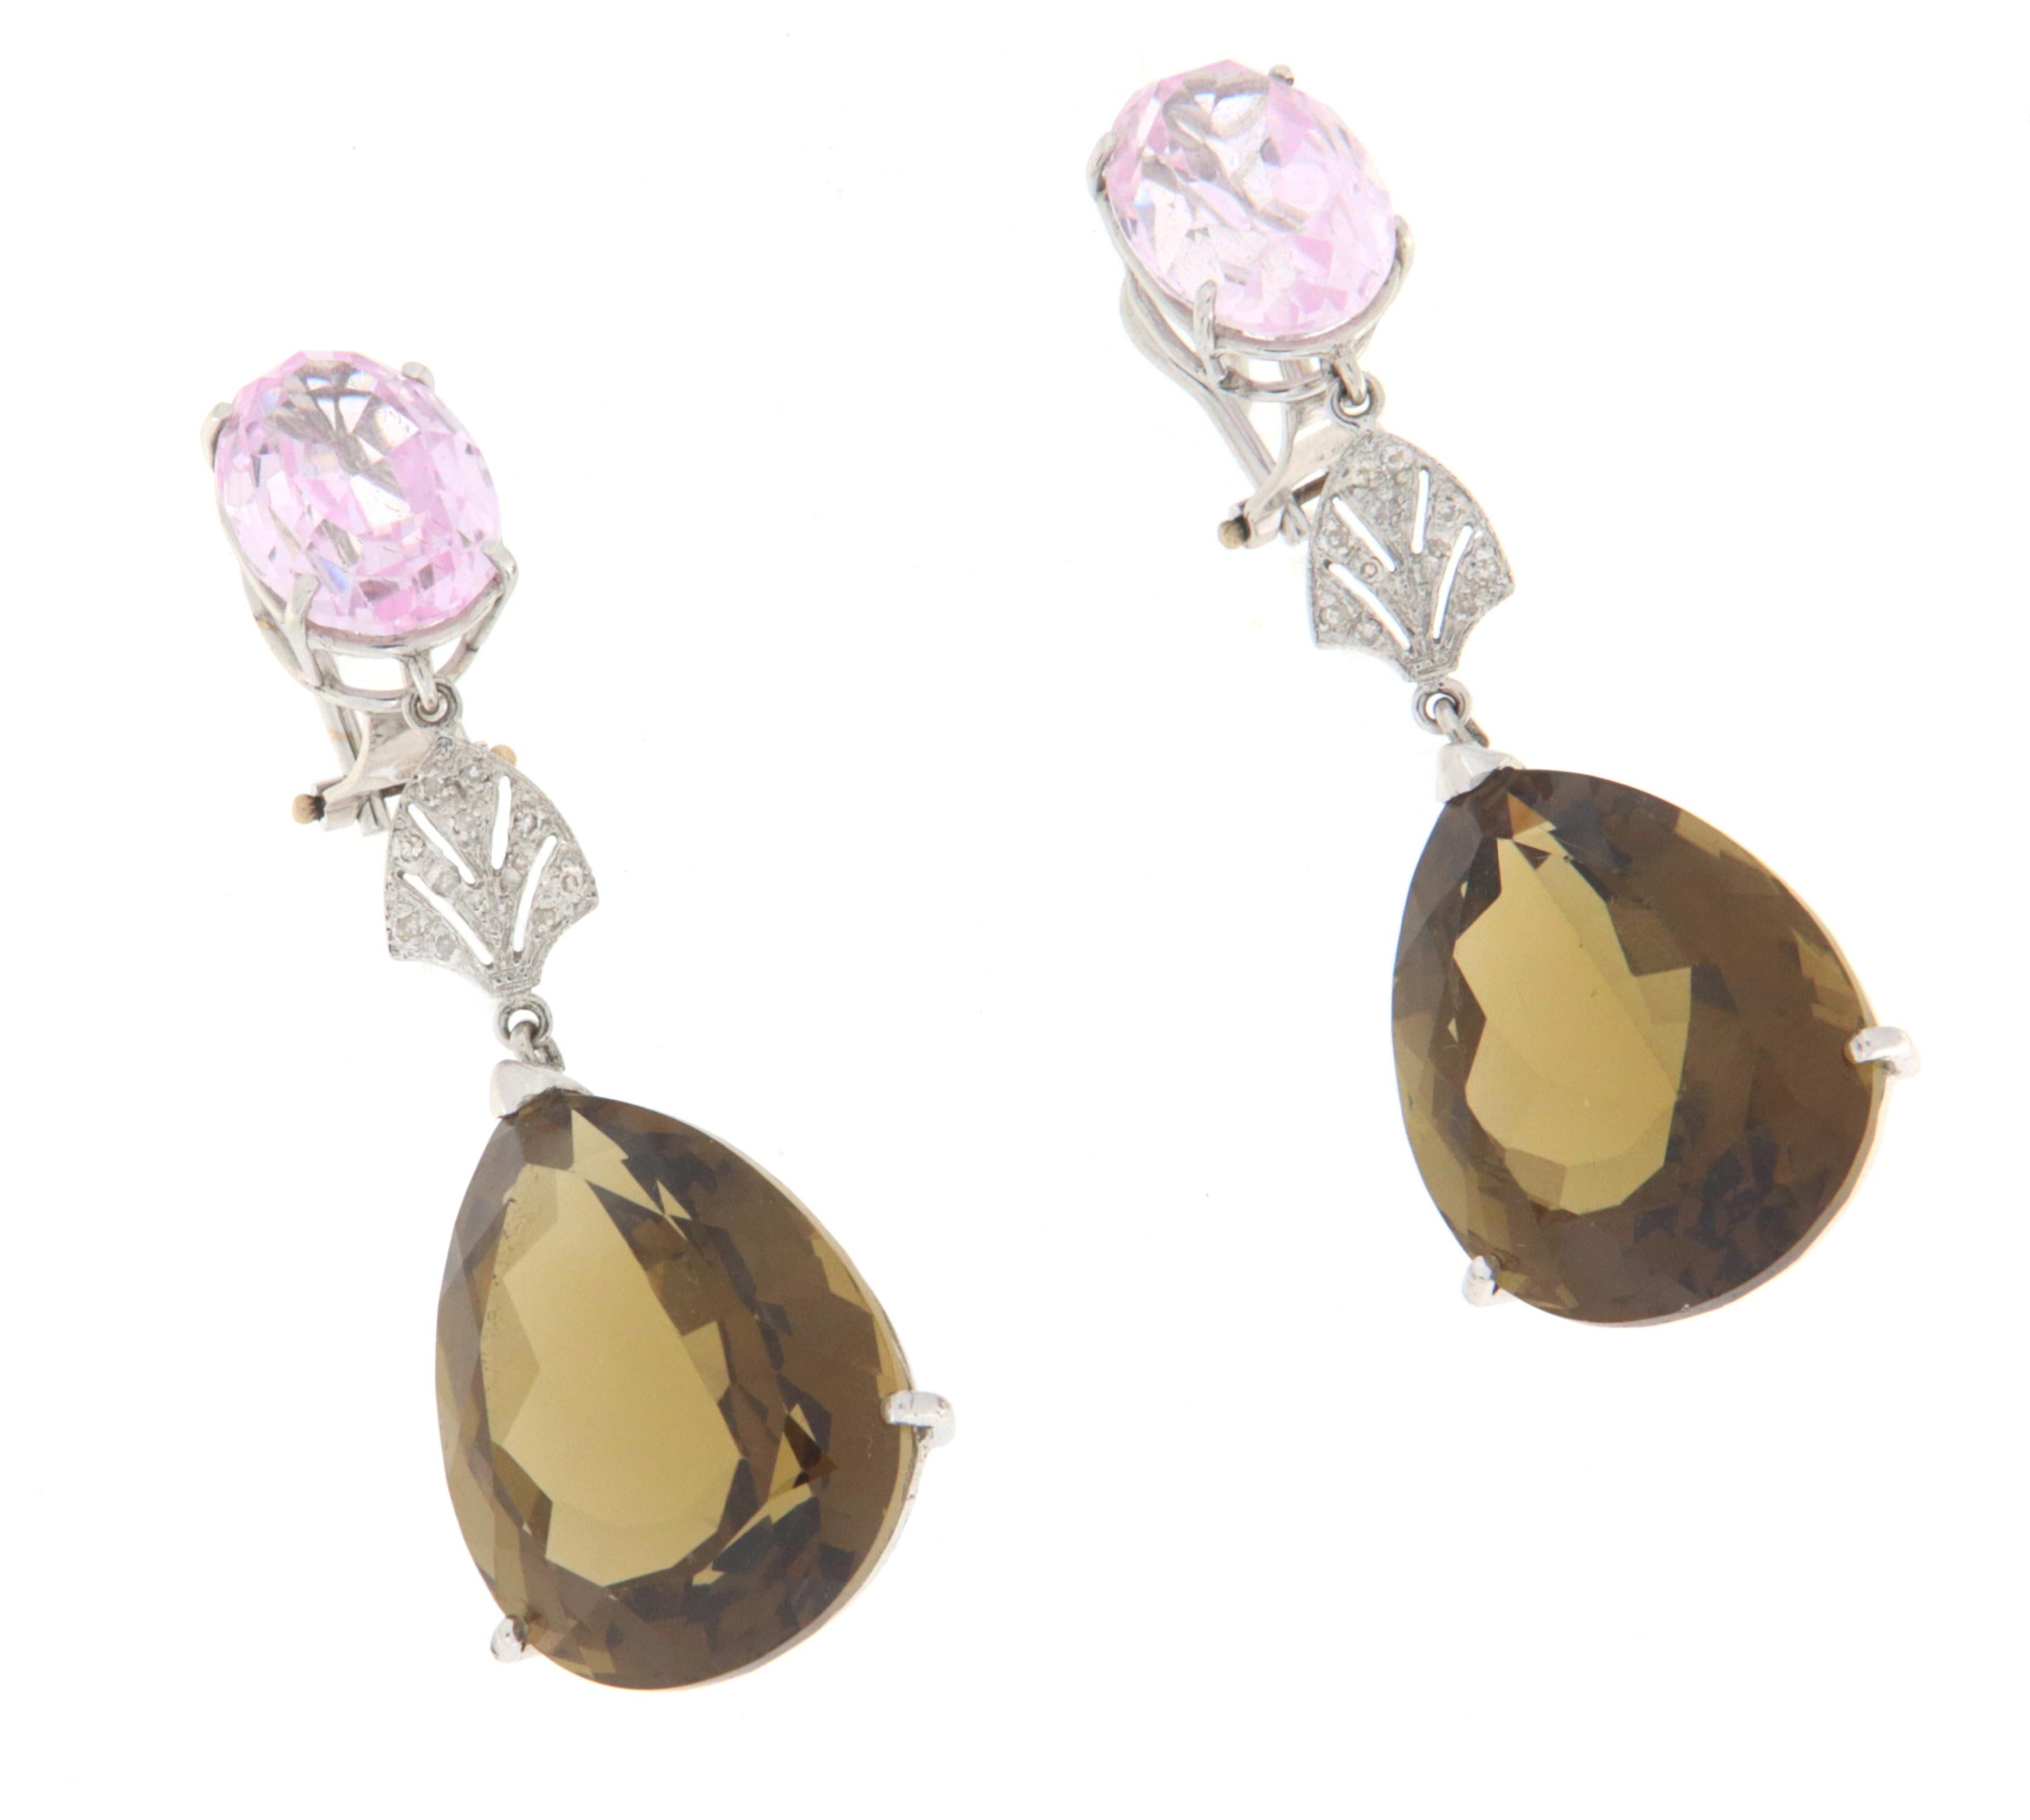 18 karat white gold earrings. Handmade by our craftsmen and assembled with pink quartz,drop citrine and diamonds.
In the highest part the two pink quartz hold two drops of yellow citrine accompanied in the center by a little diamonds.
Earring with a